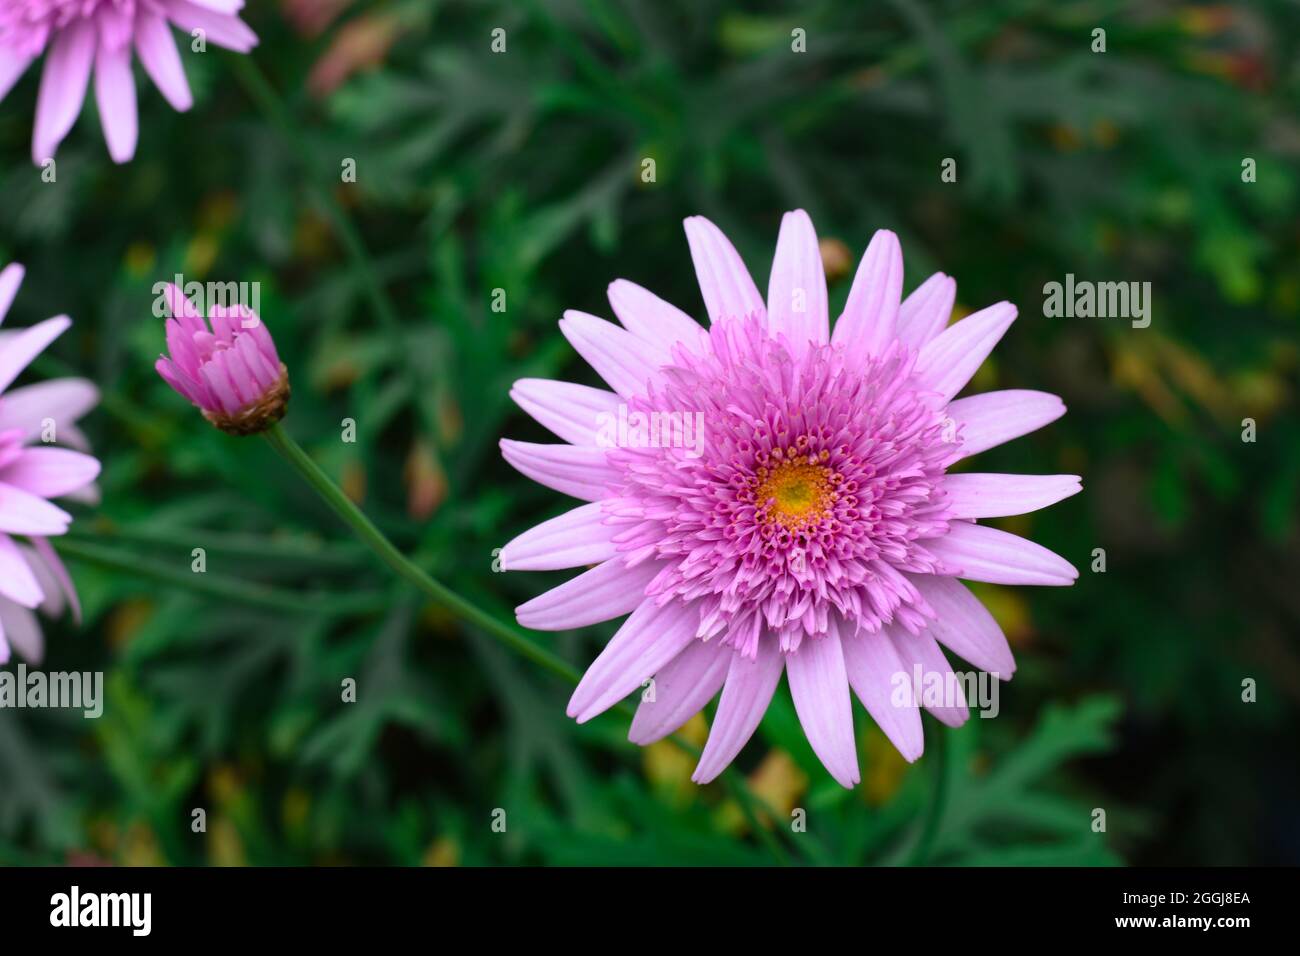 Bloomed pink Argyranthemum frutescens, known as Paris daisy, Stock Photo